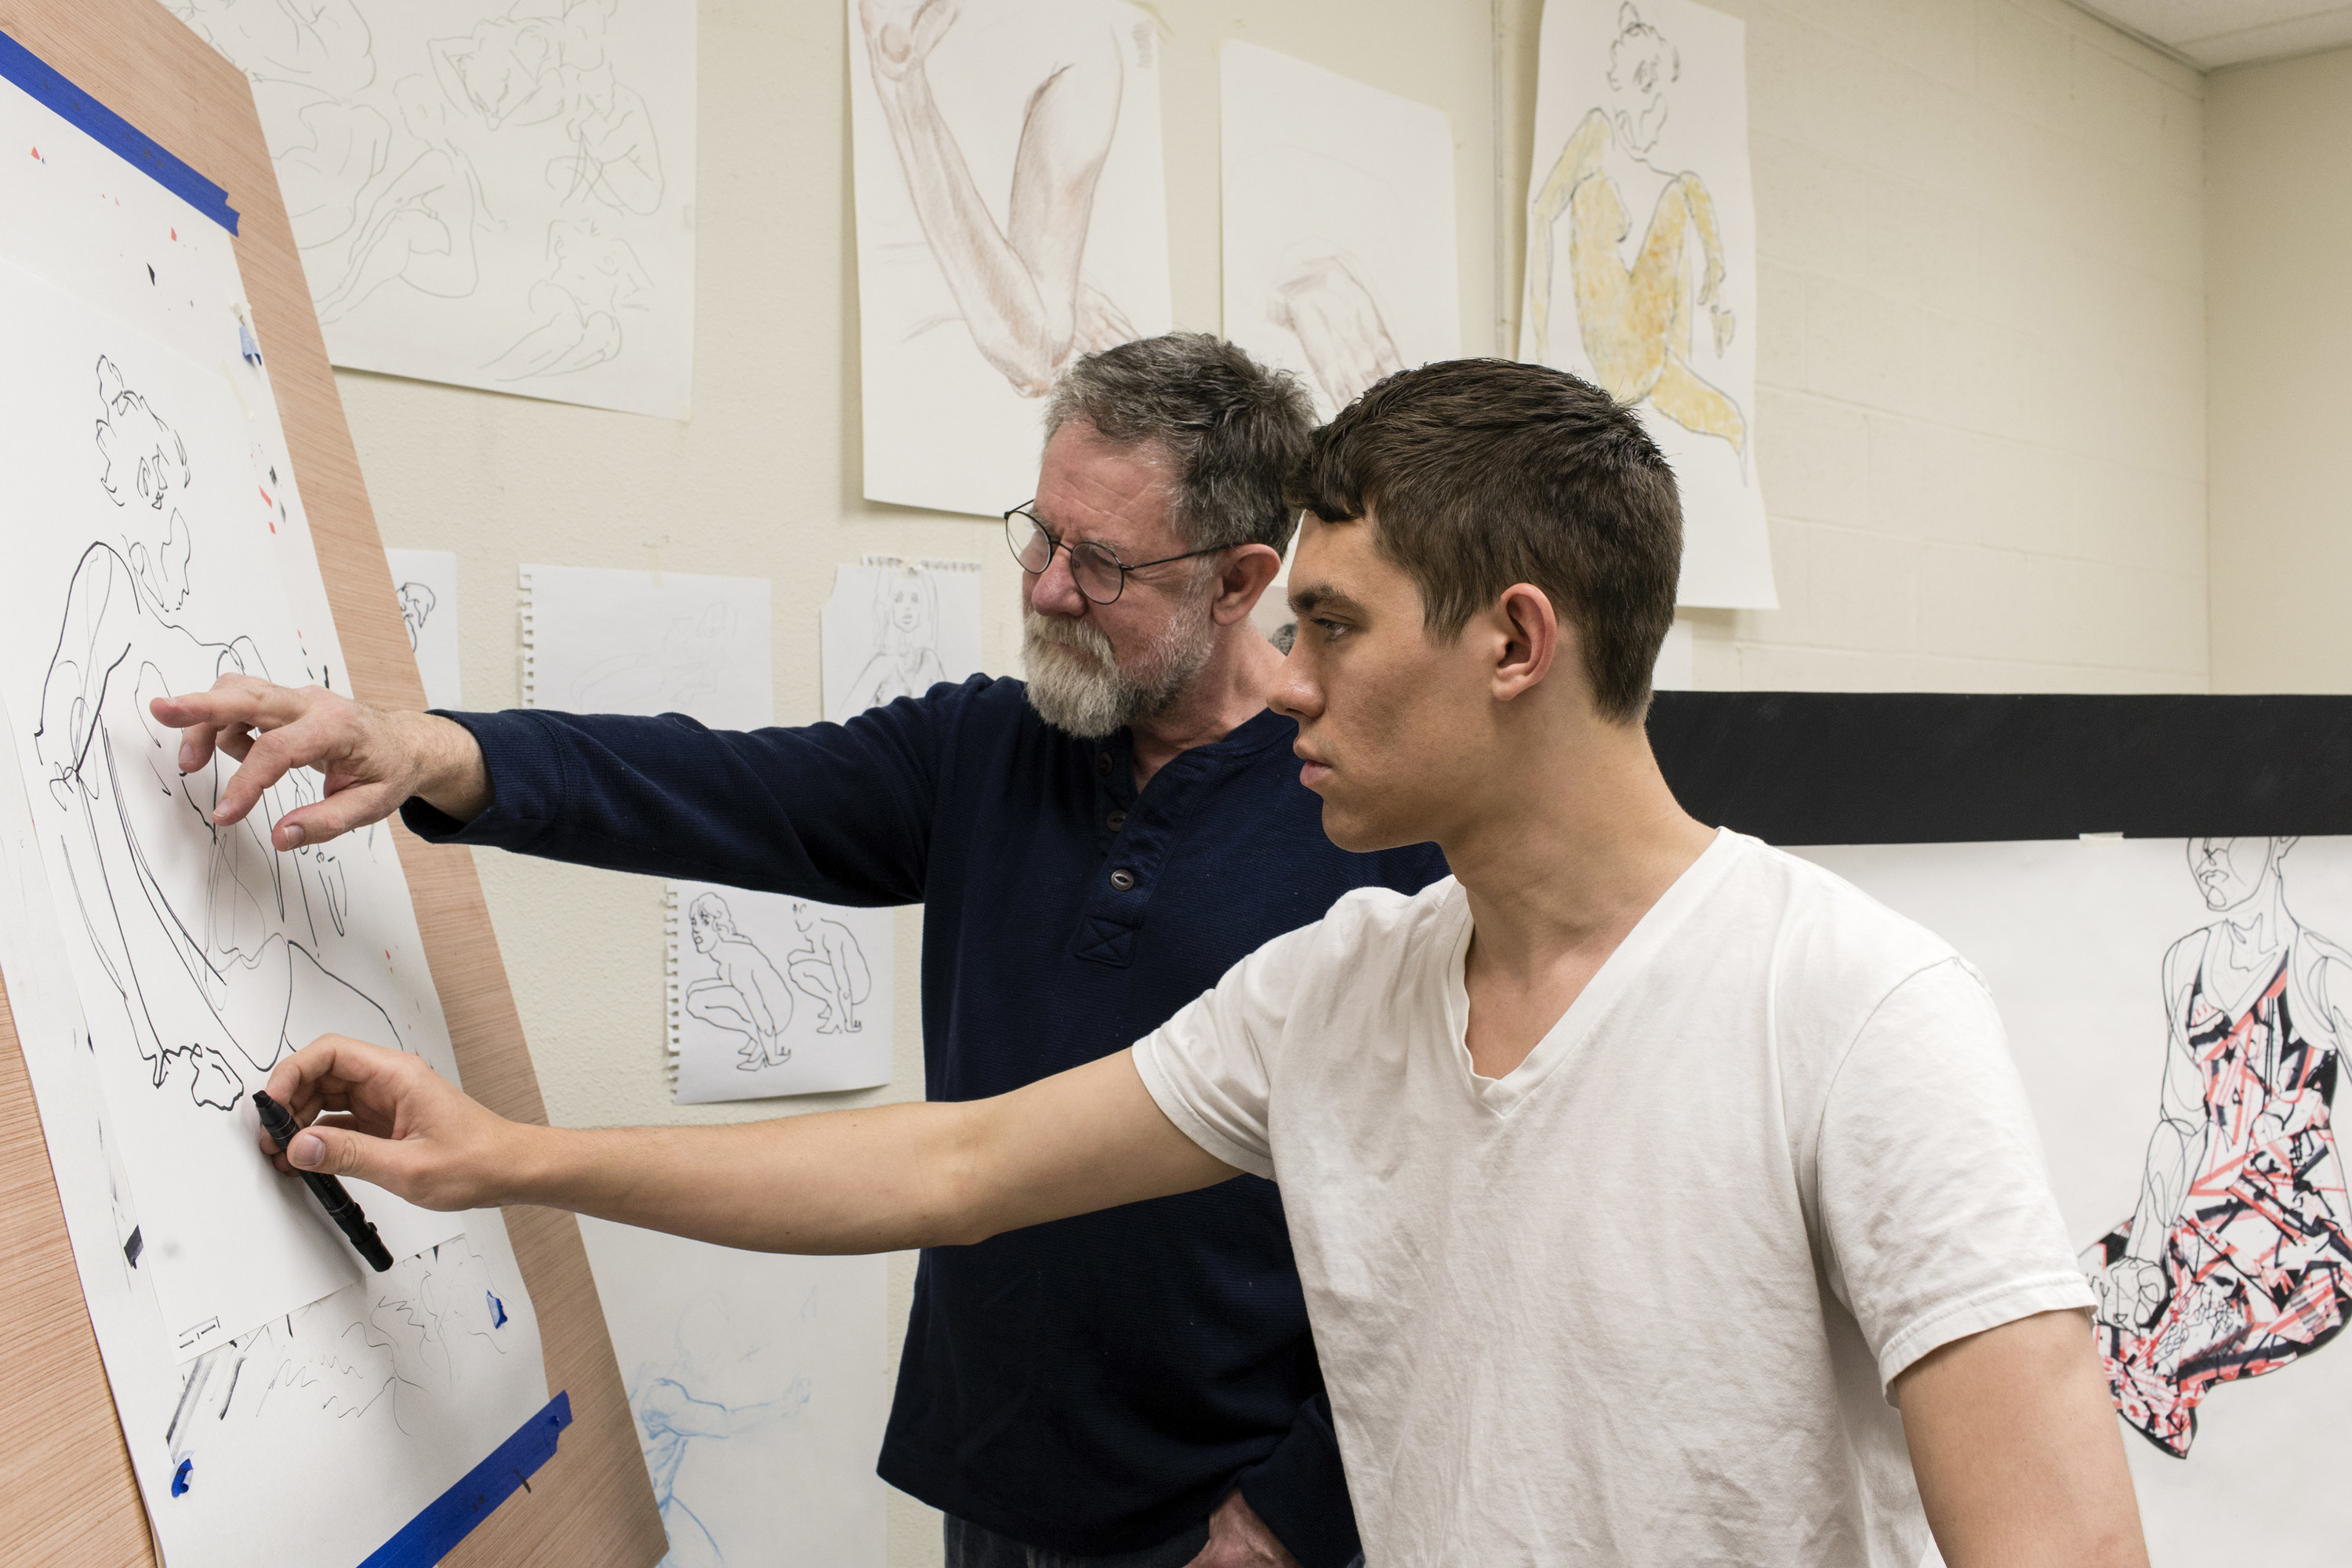 A man offers guidance to a young artist working on a drawing